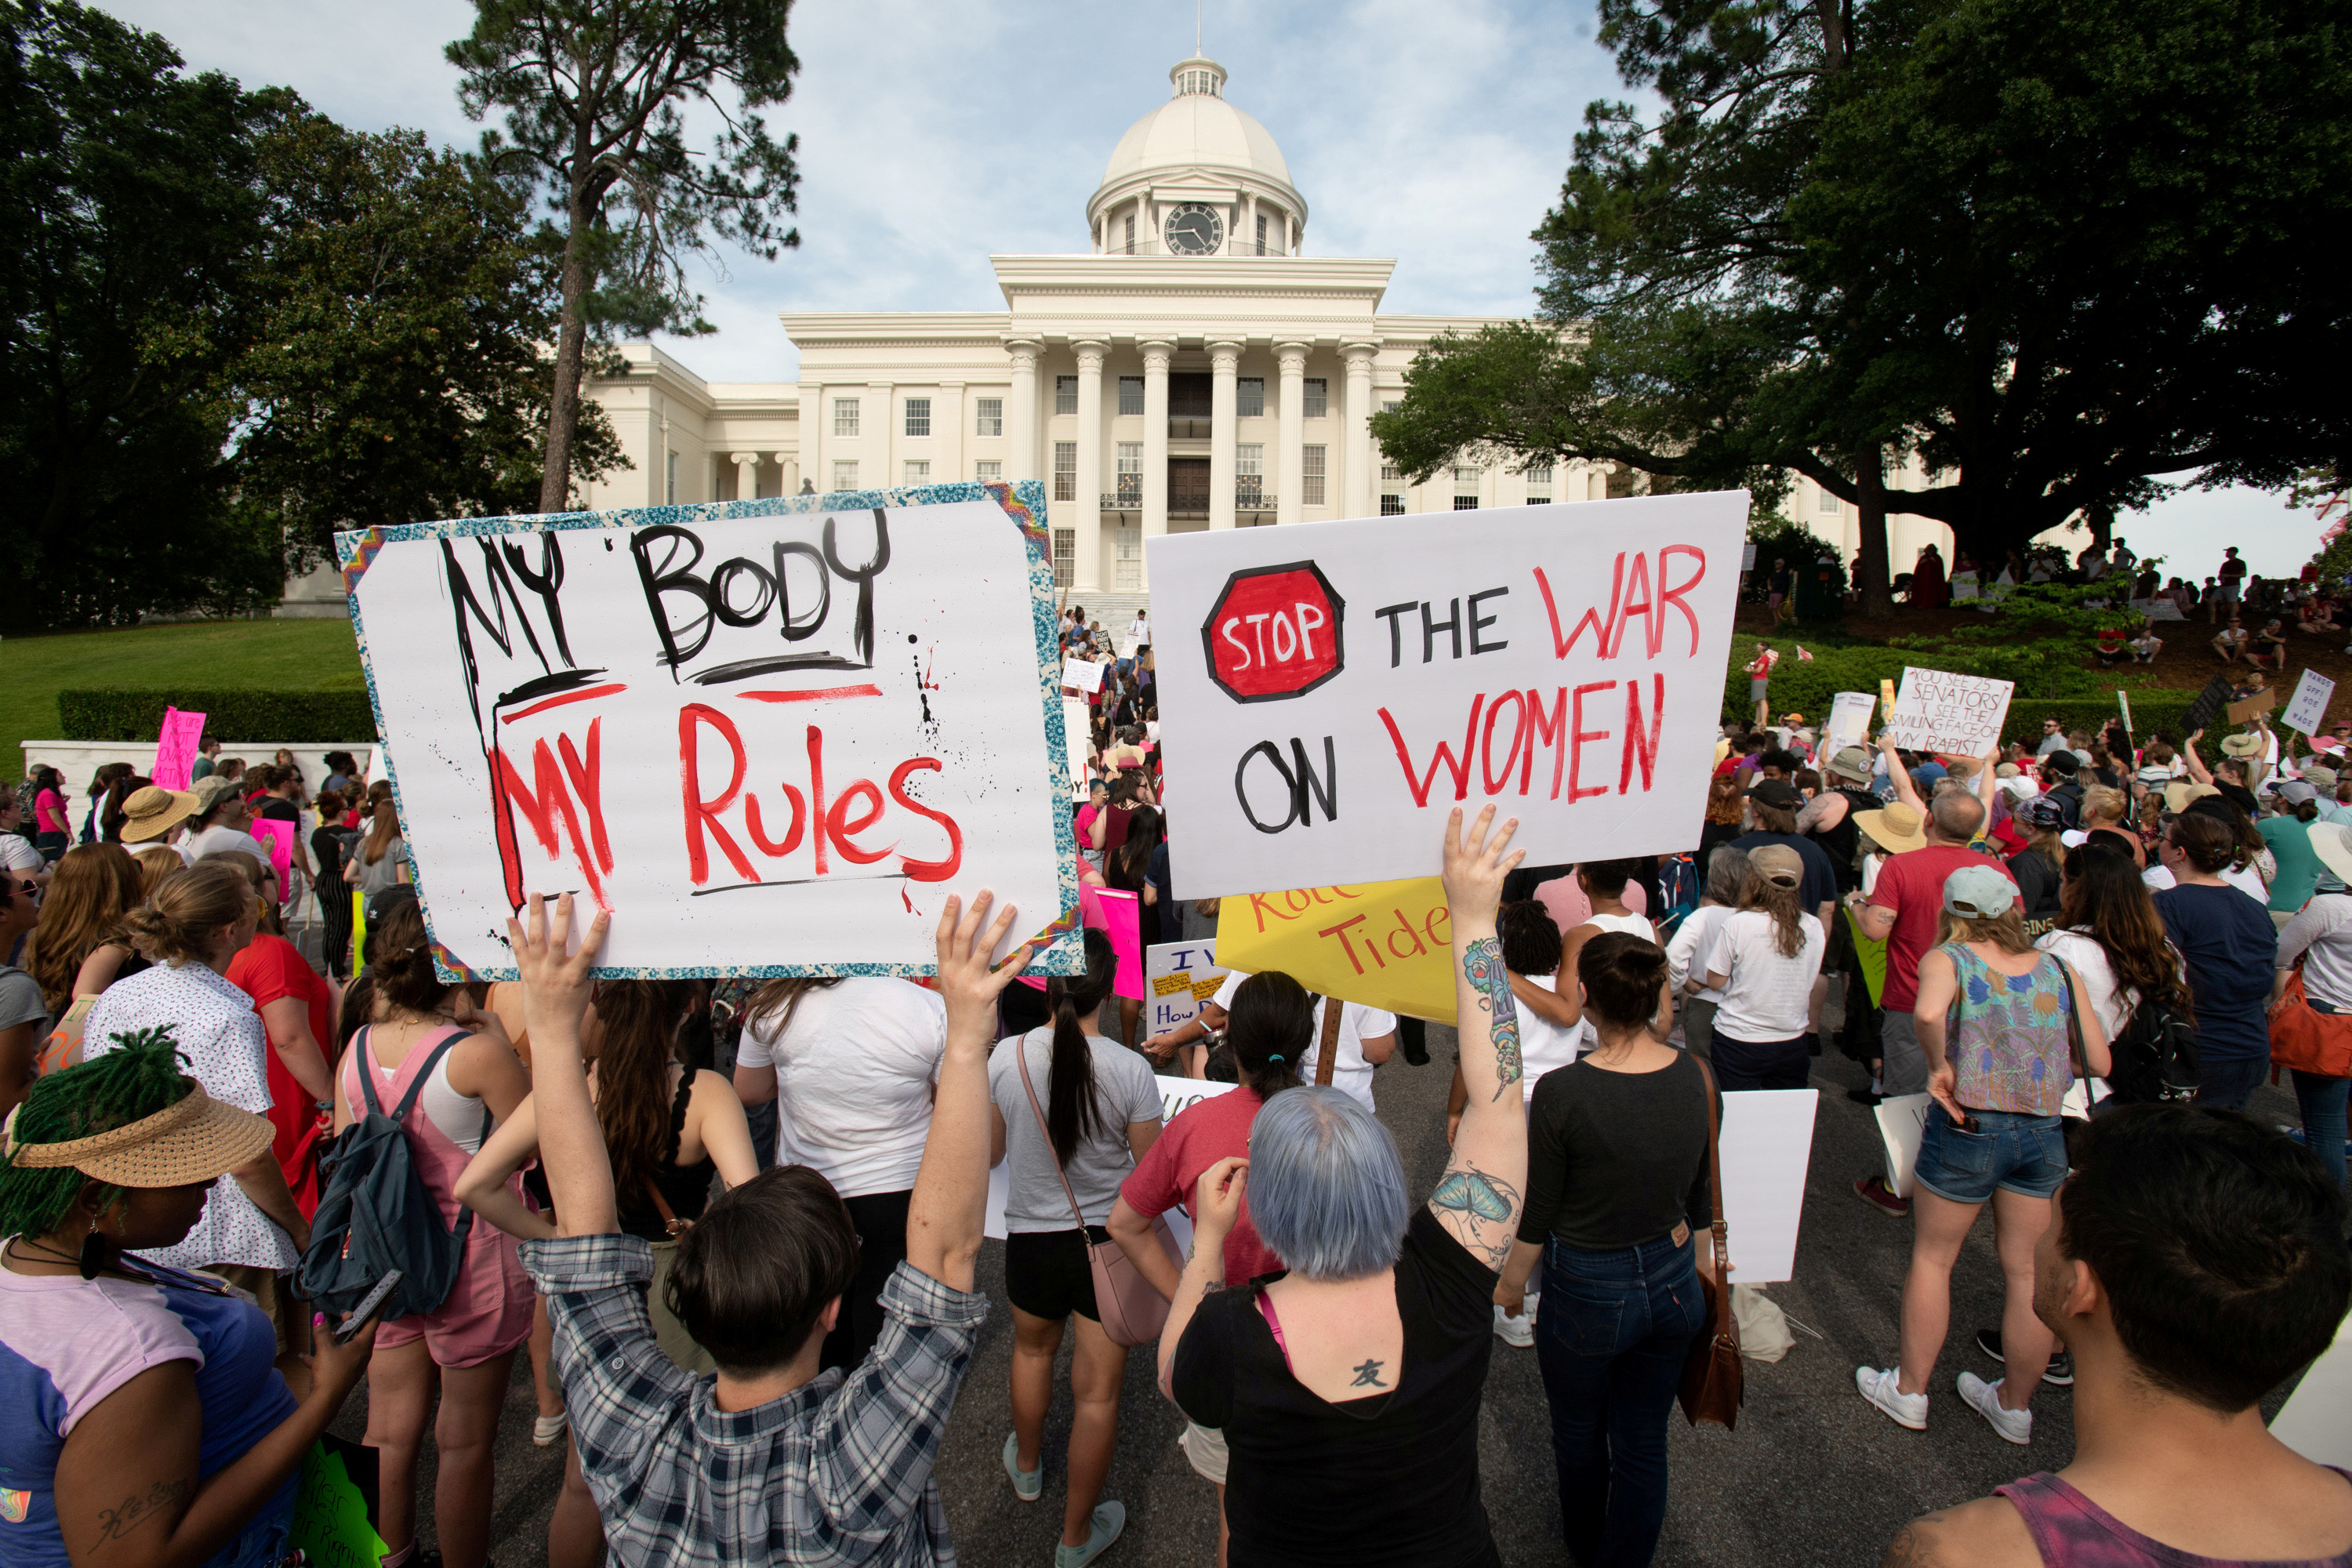 People gather at the Alabama State Capitol during the March for Reproductive Freedom against the state's new abortion law, the Alabama Human Life Protection Act, in Montgomery, Alabama, U.S. May 19, 2019. REUTERS/Michael Spooneybarger